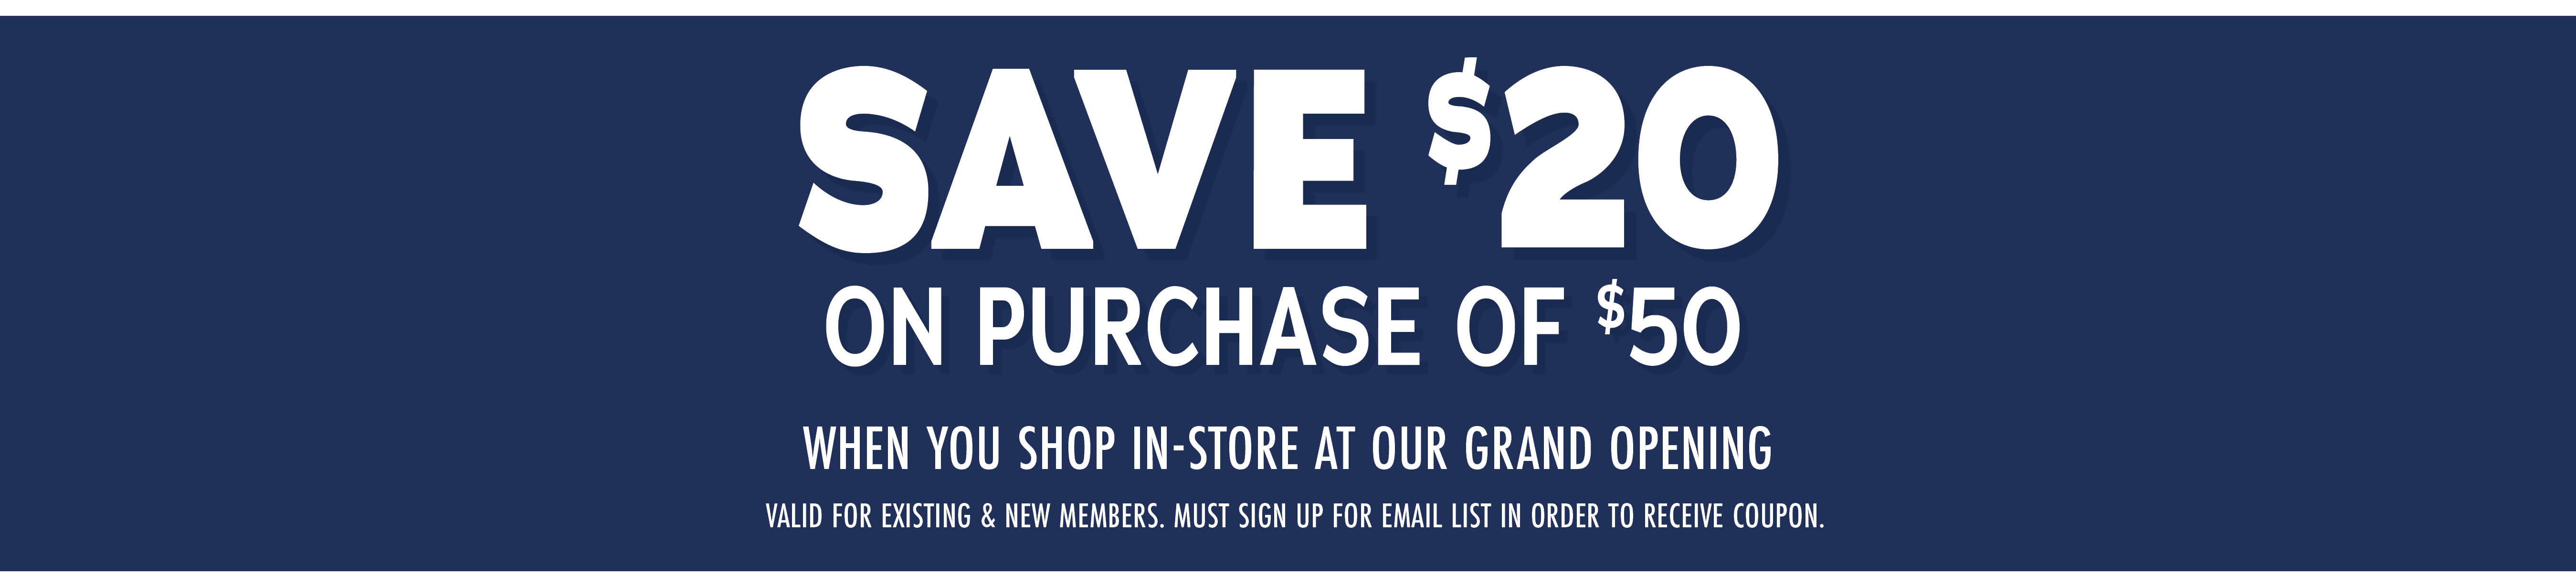 Save $20 on your purchase of $50 when you shop in-store at our grand opening. Valid for existing & new members. must sign up for email list in order to receive coupon.